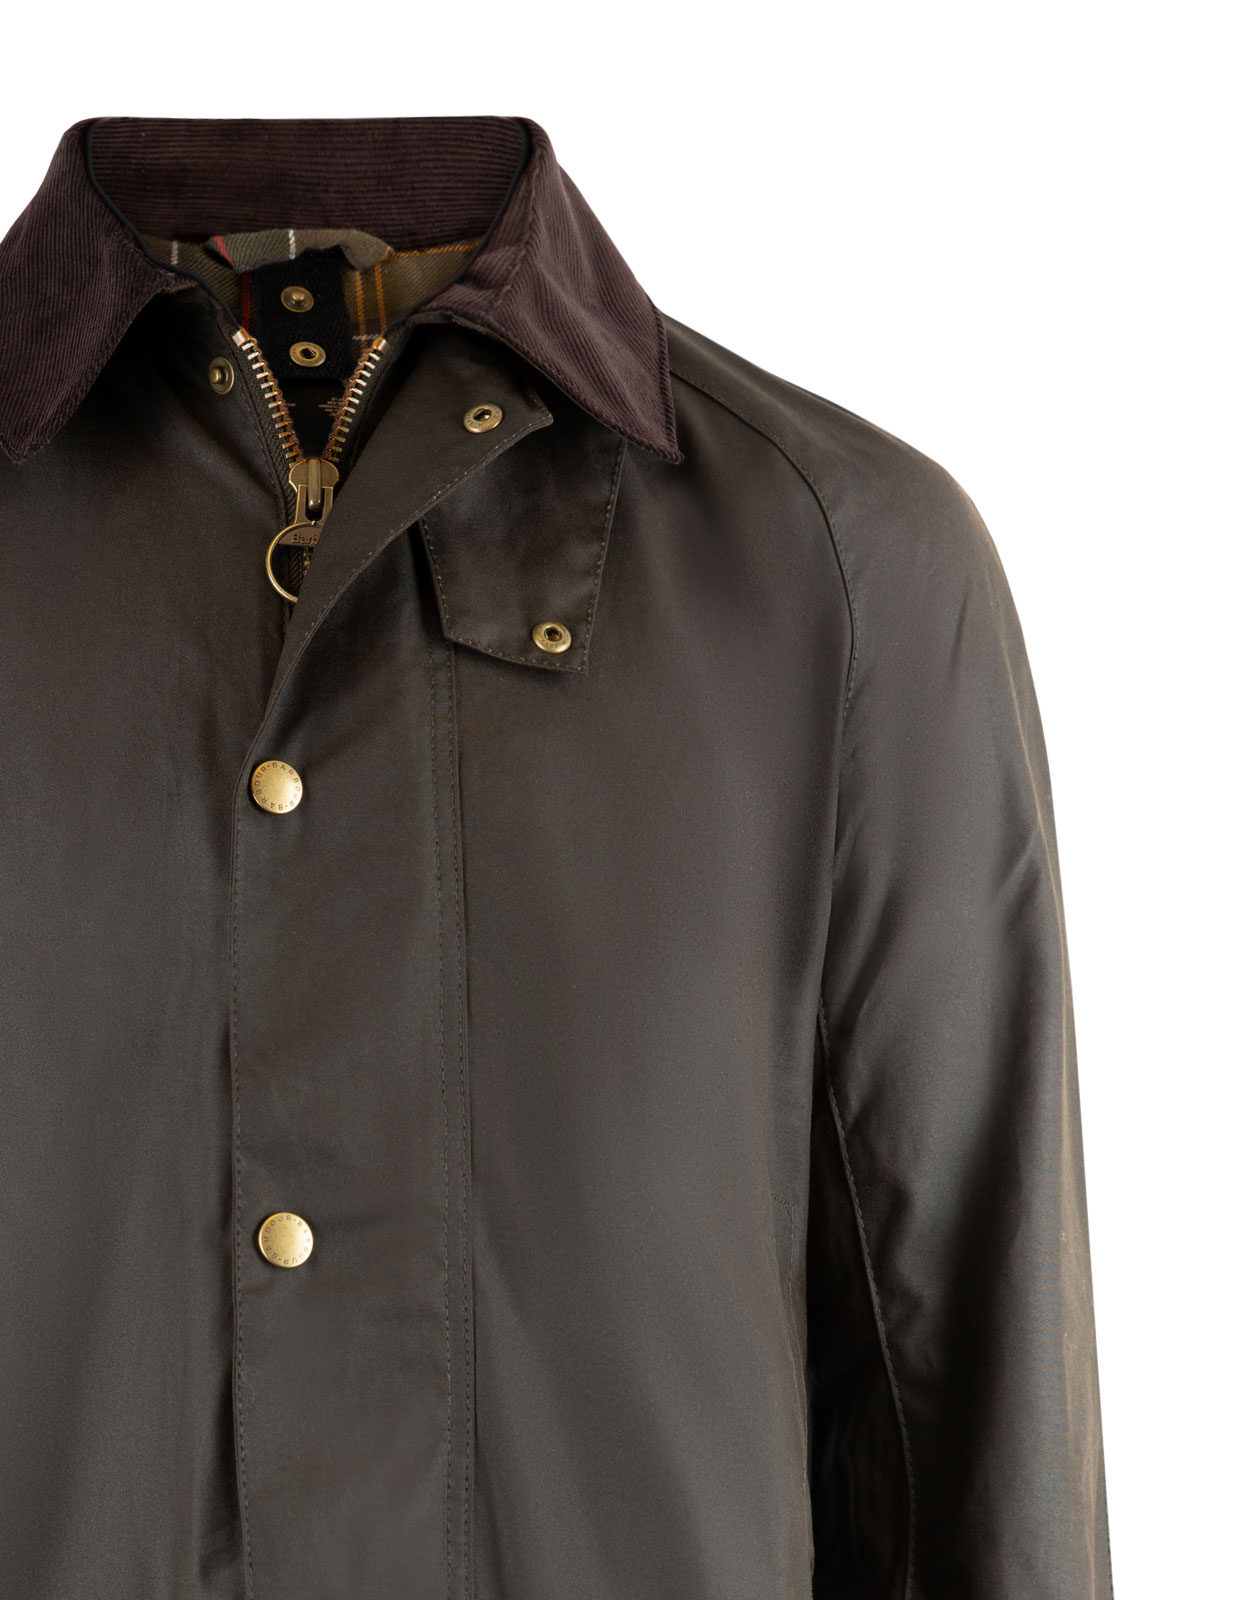 Beausby Waxed Jacket Olive Stl S